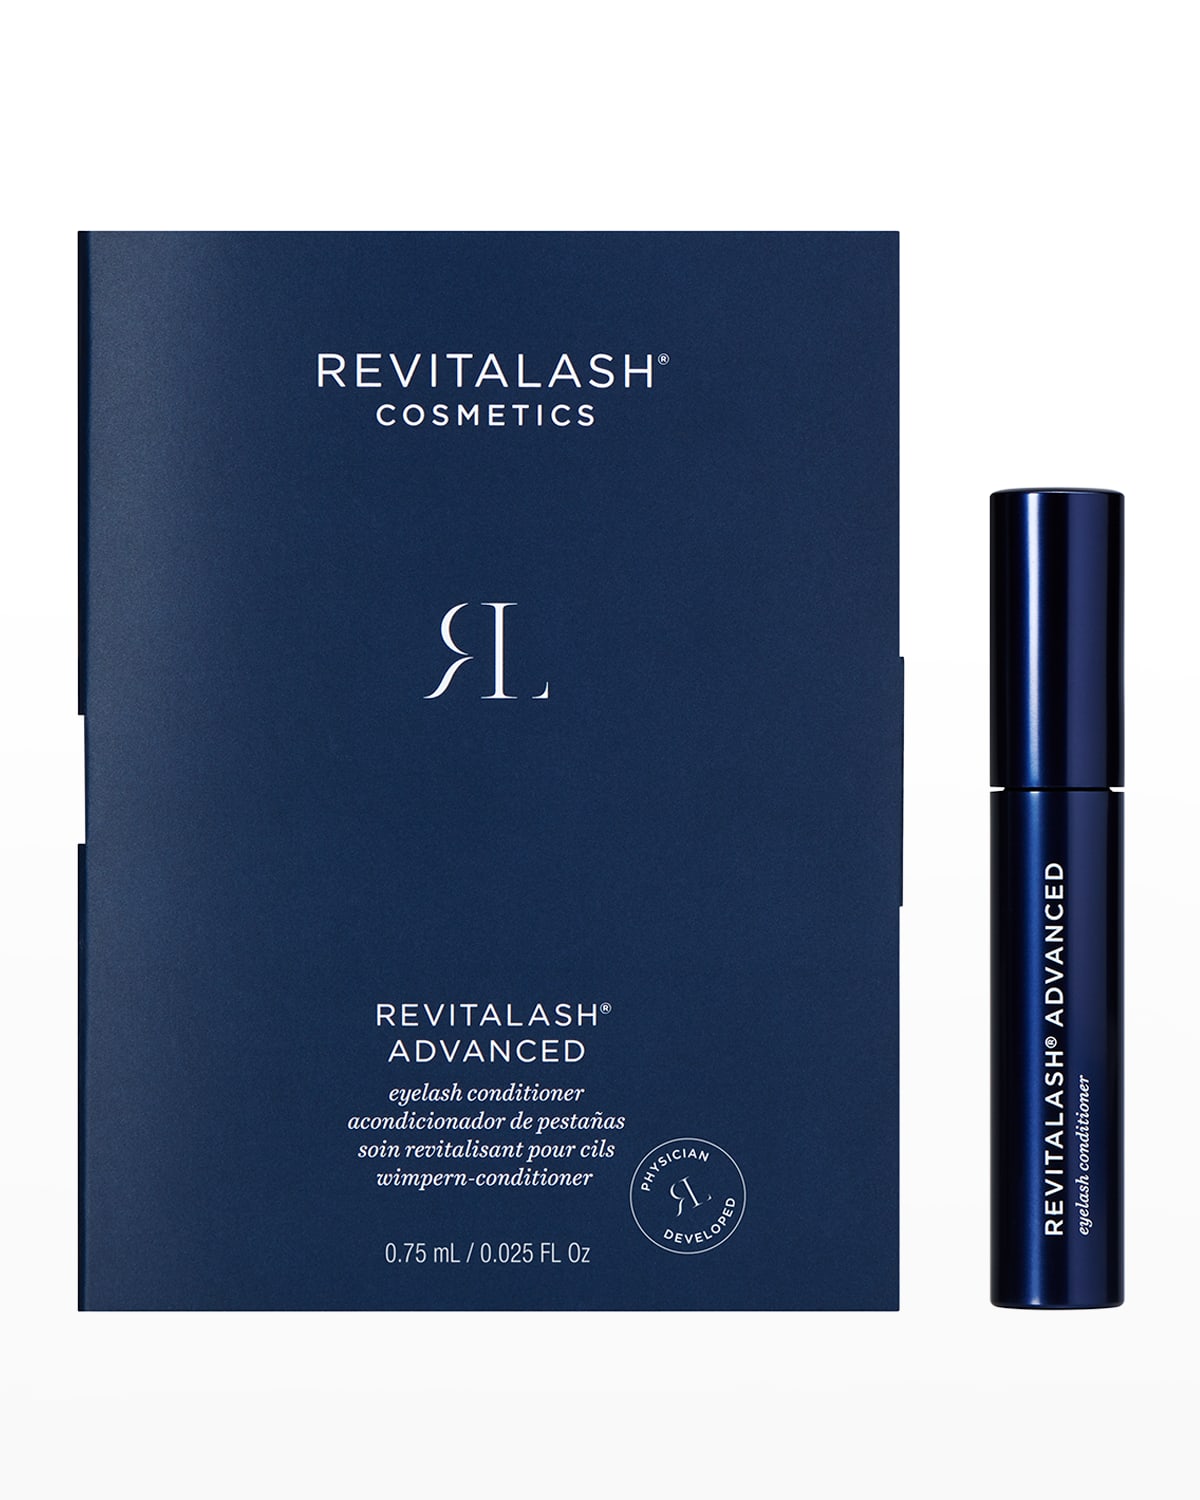 Advanced Eyelash Conditioner Deluxe Sample, Yours with any $100 RevitaLash Purchase